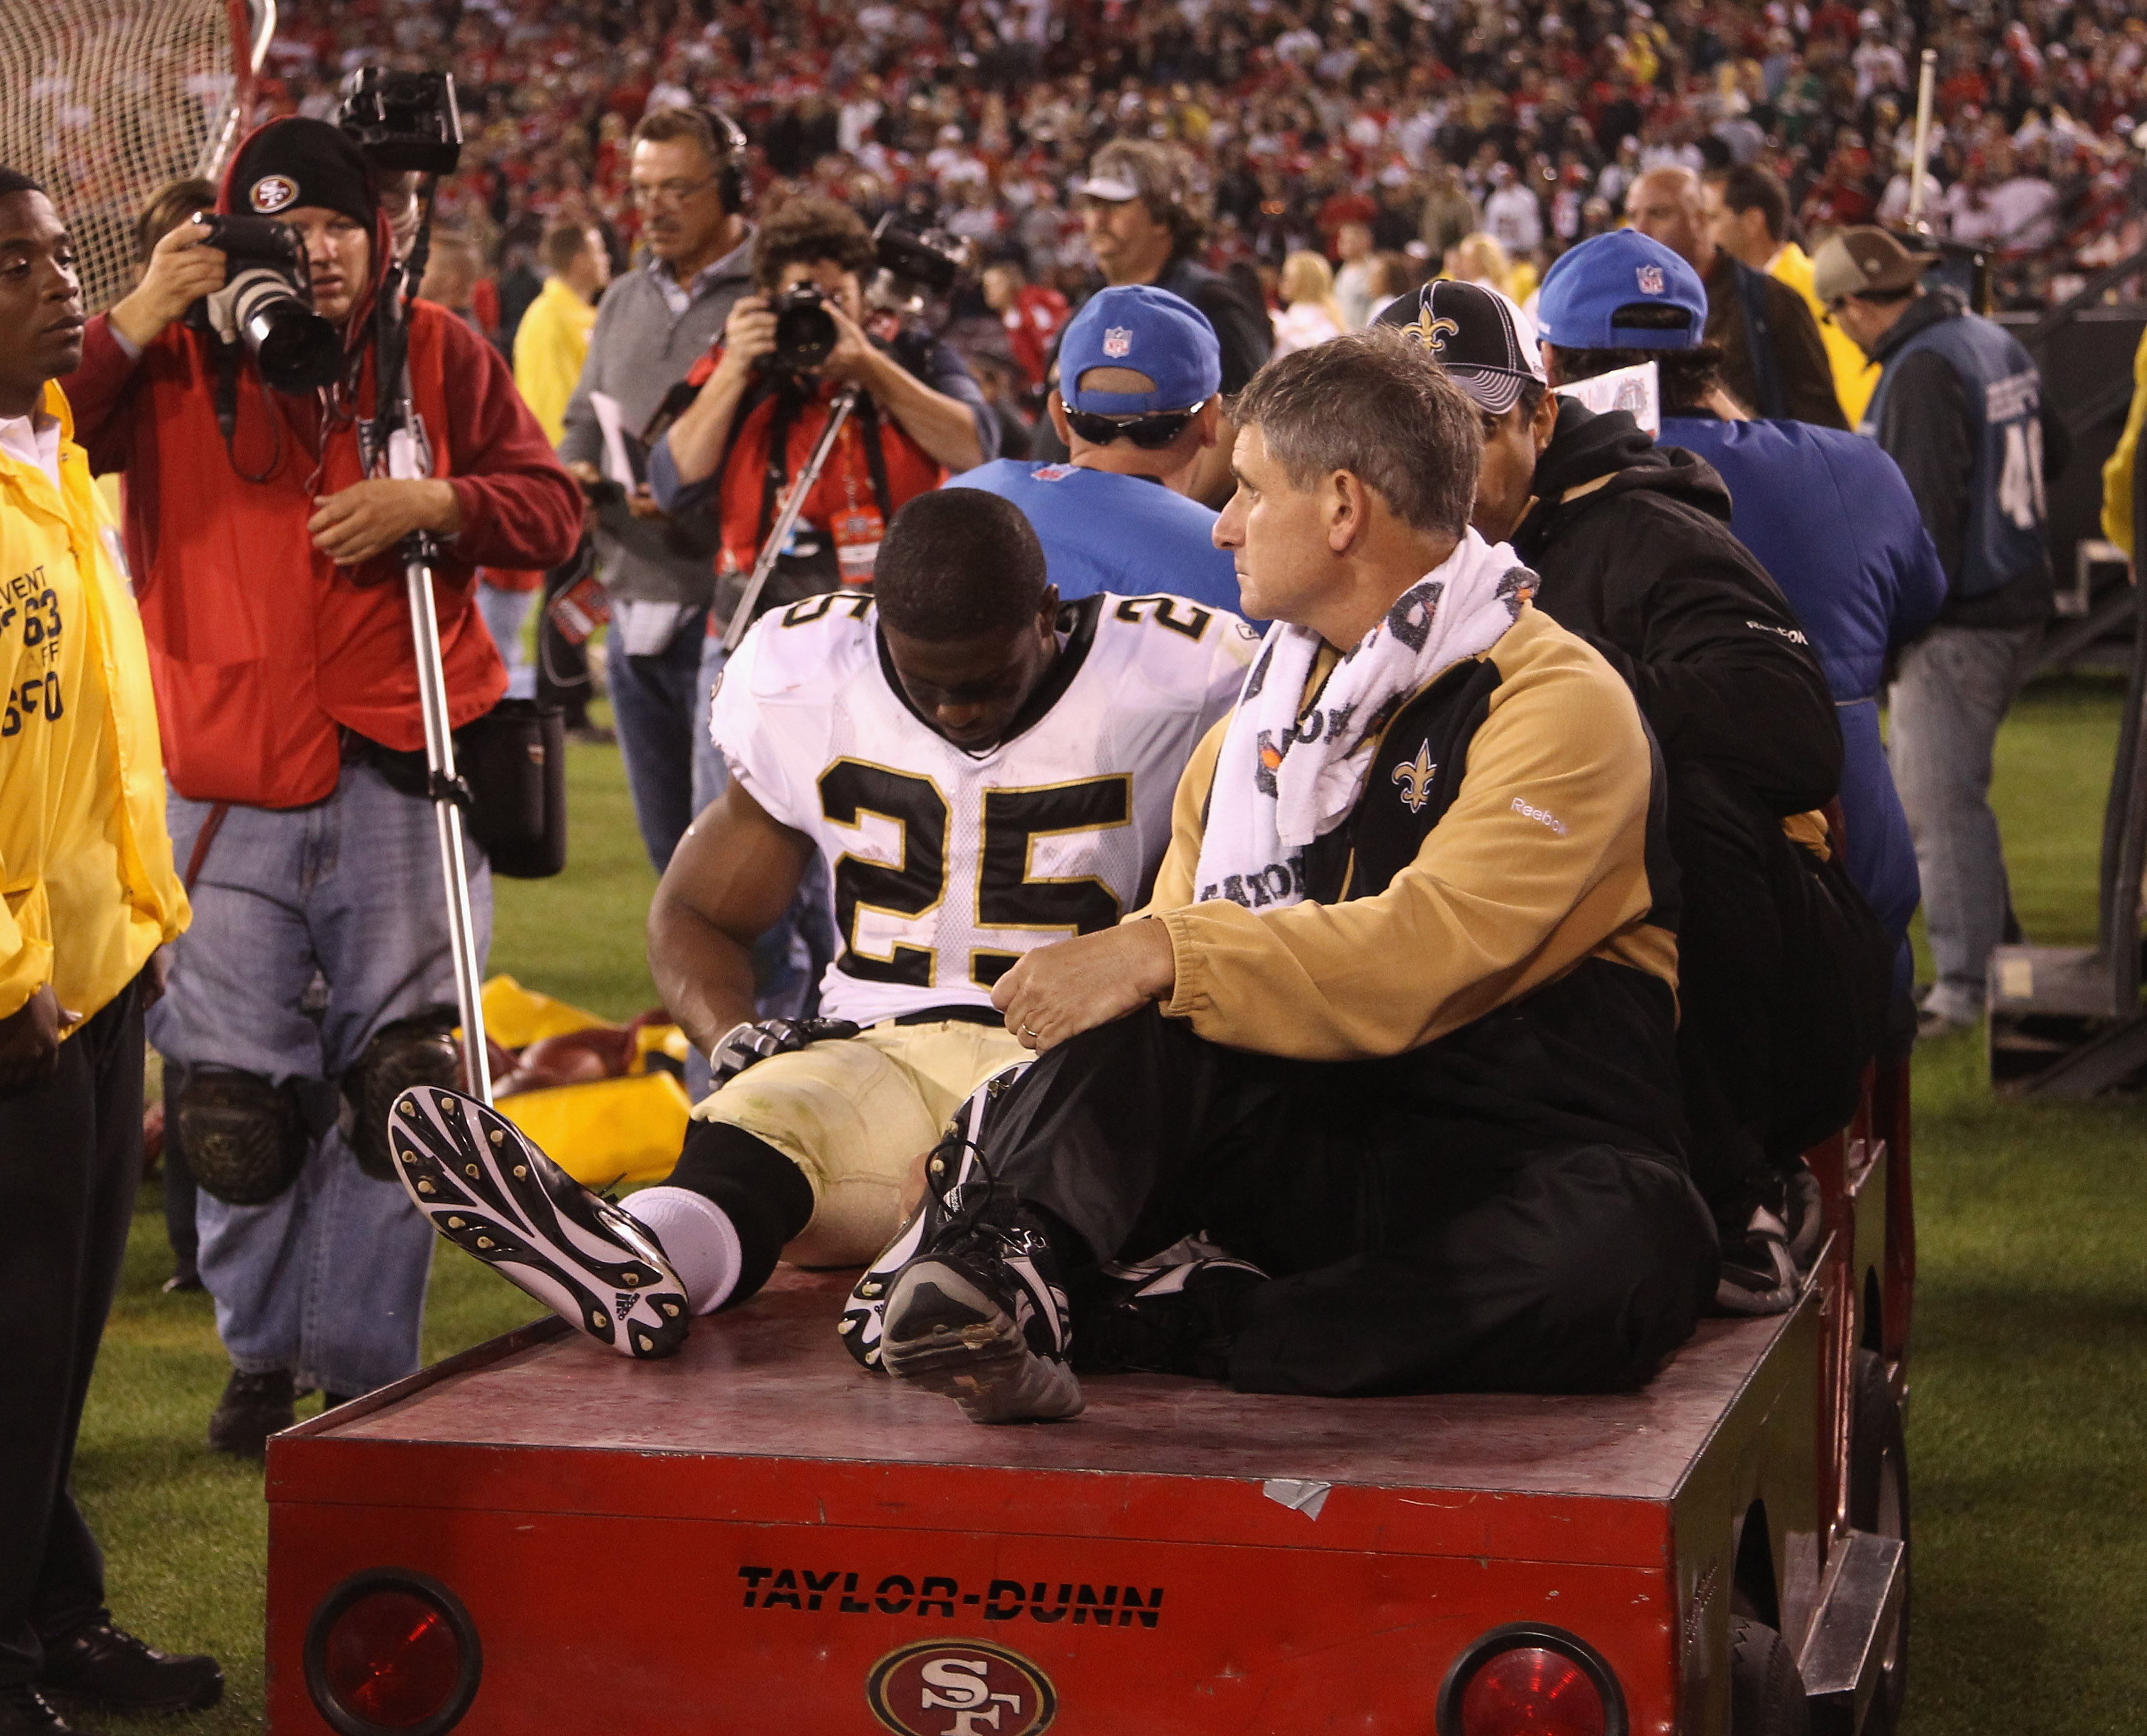 SAN FRANCISCO - SEPTEMBER 20:  Reggie Bush #25 of the New Orleans Saints leaves the field after being injured during their game against the San Francisco 49ers at Candlestick Park on September 20, 2010 in San Francisco, California.  (Photo by Ezra Shaw/Ge